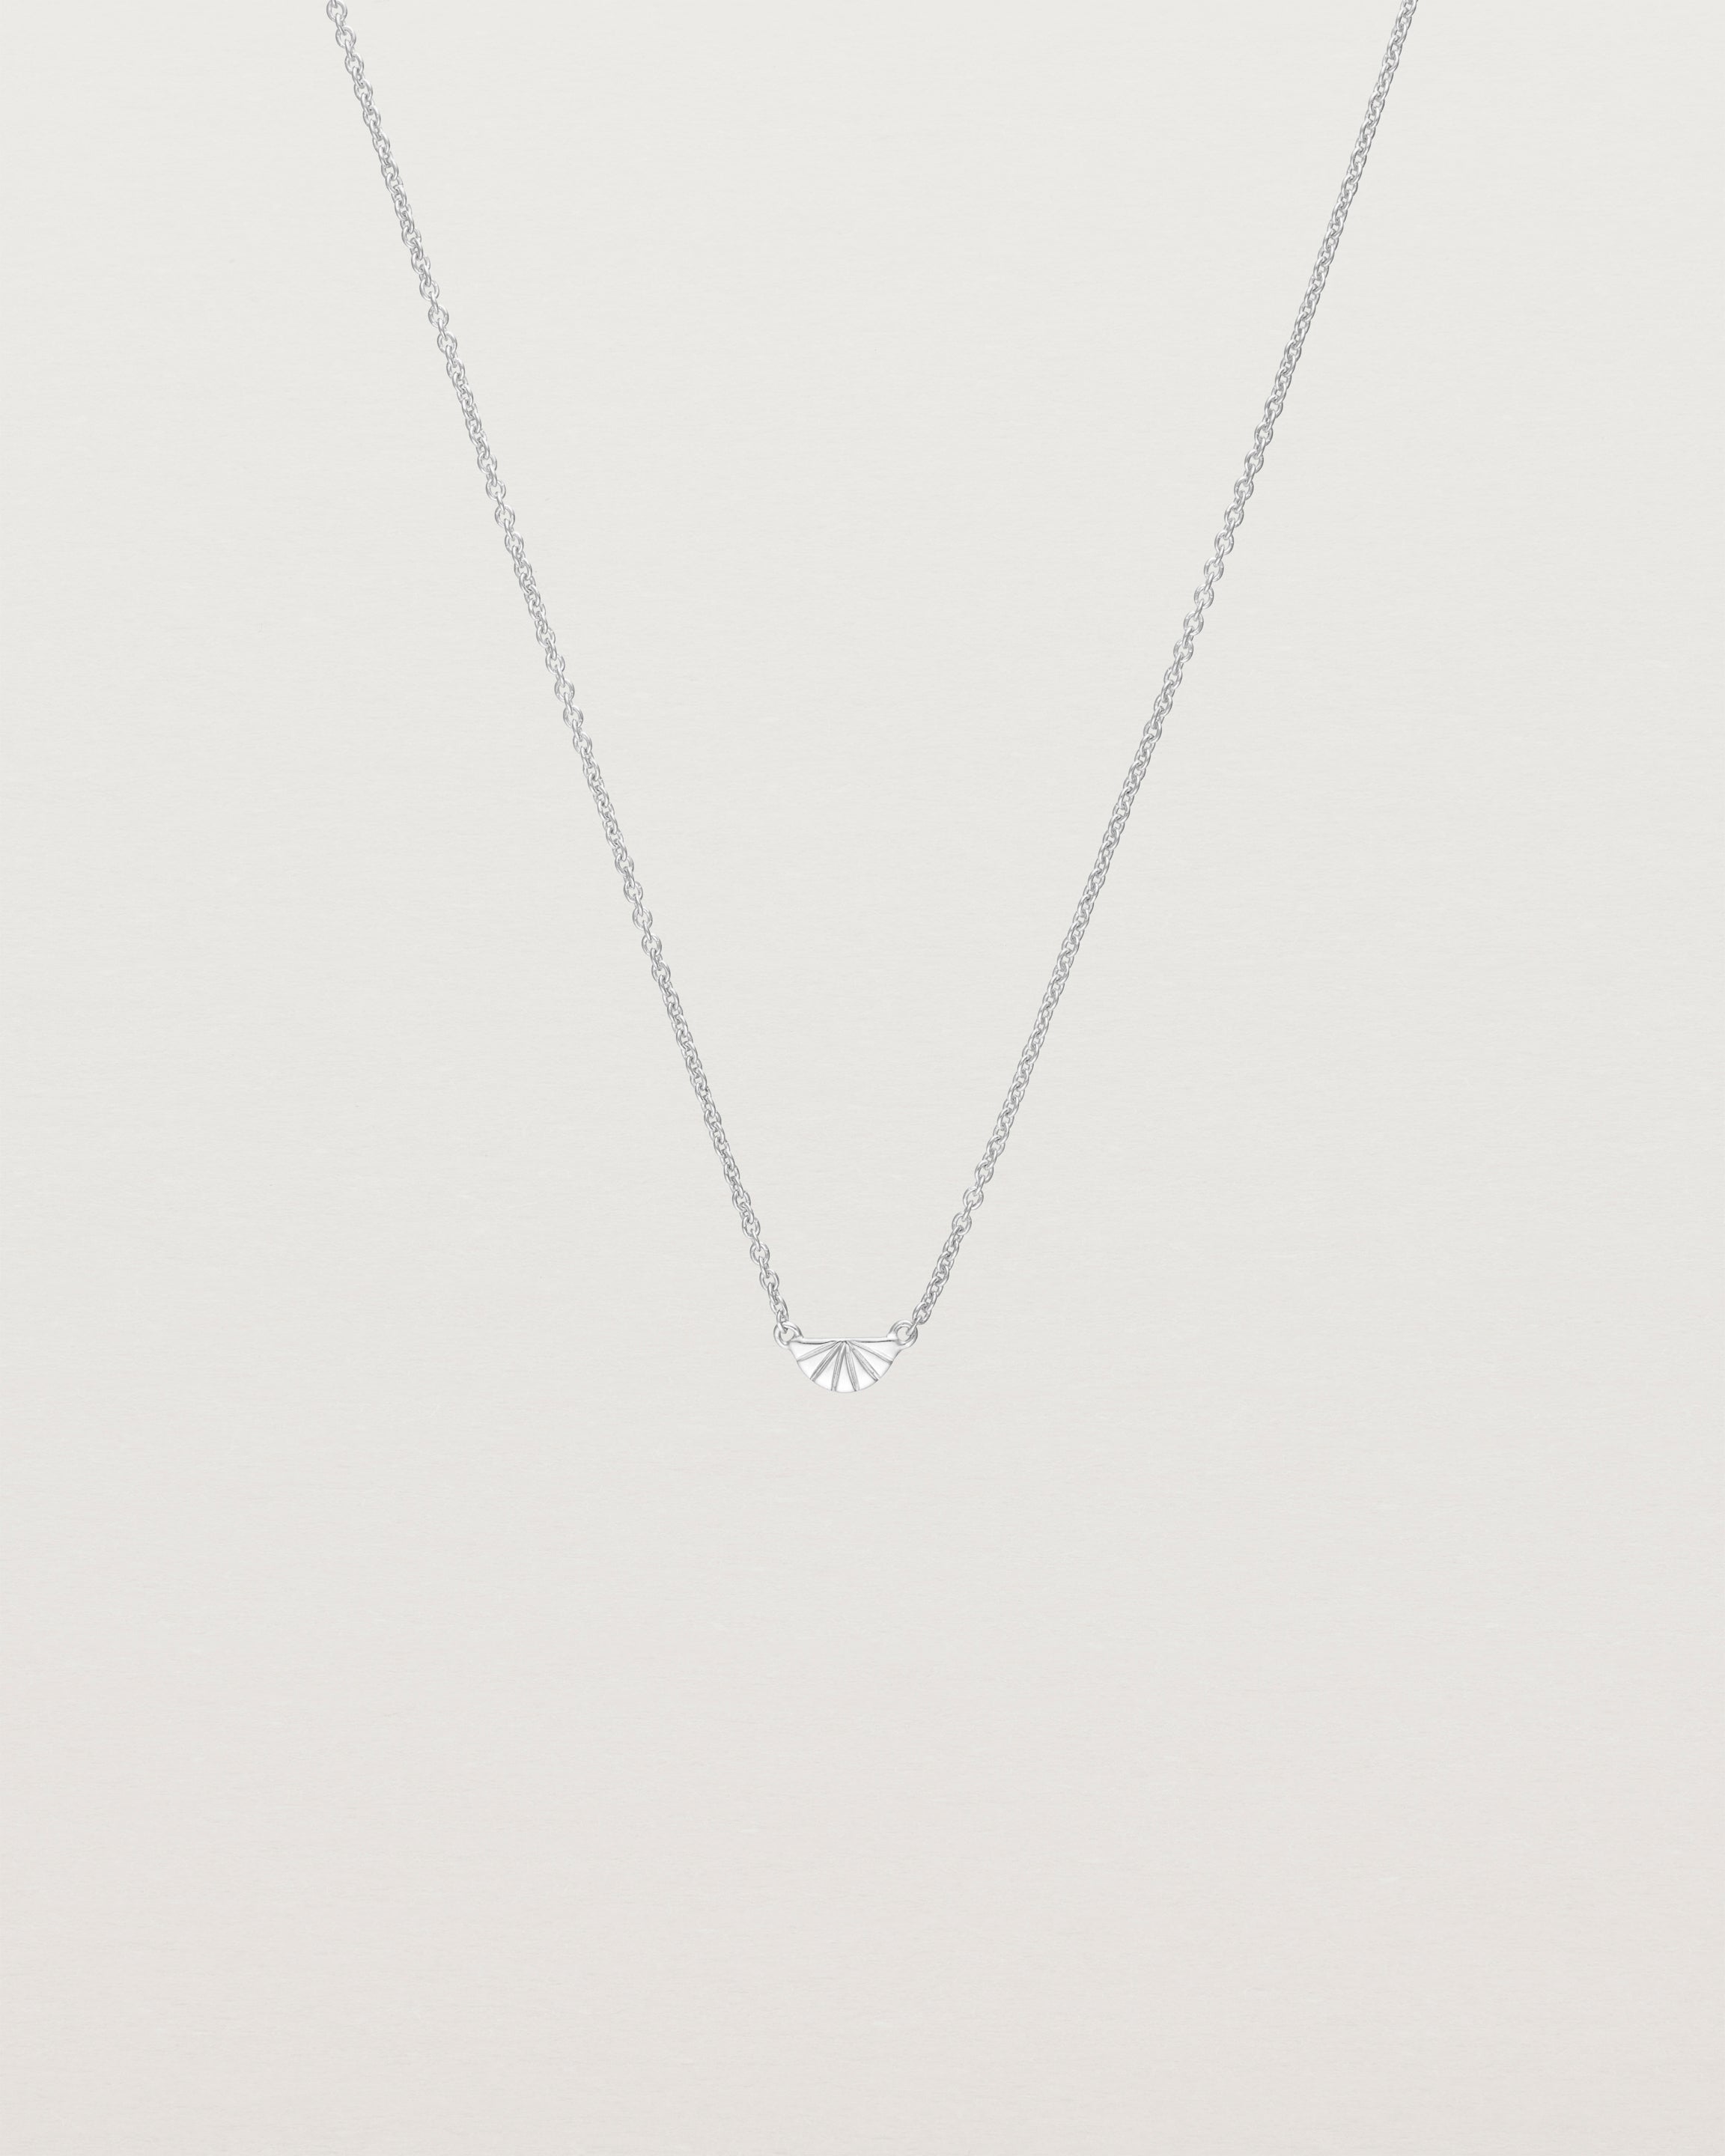 Front view of the Jia Necklace in Sterling Silver.